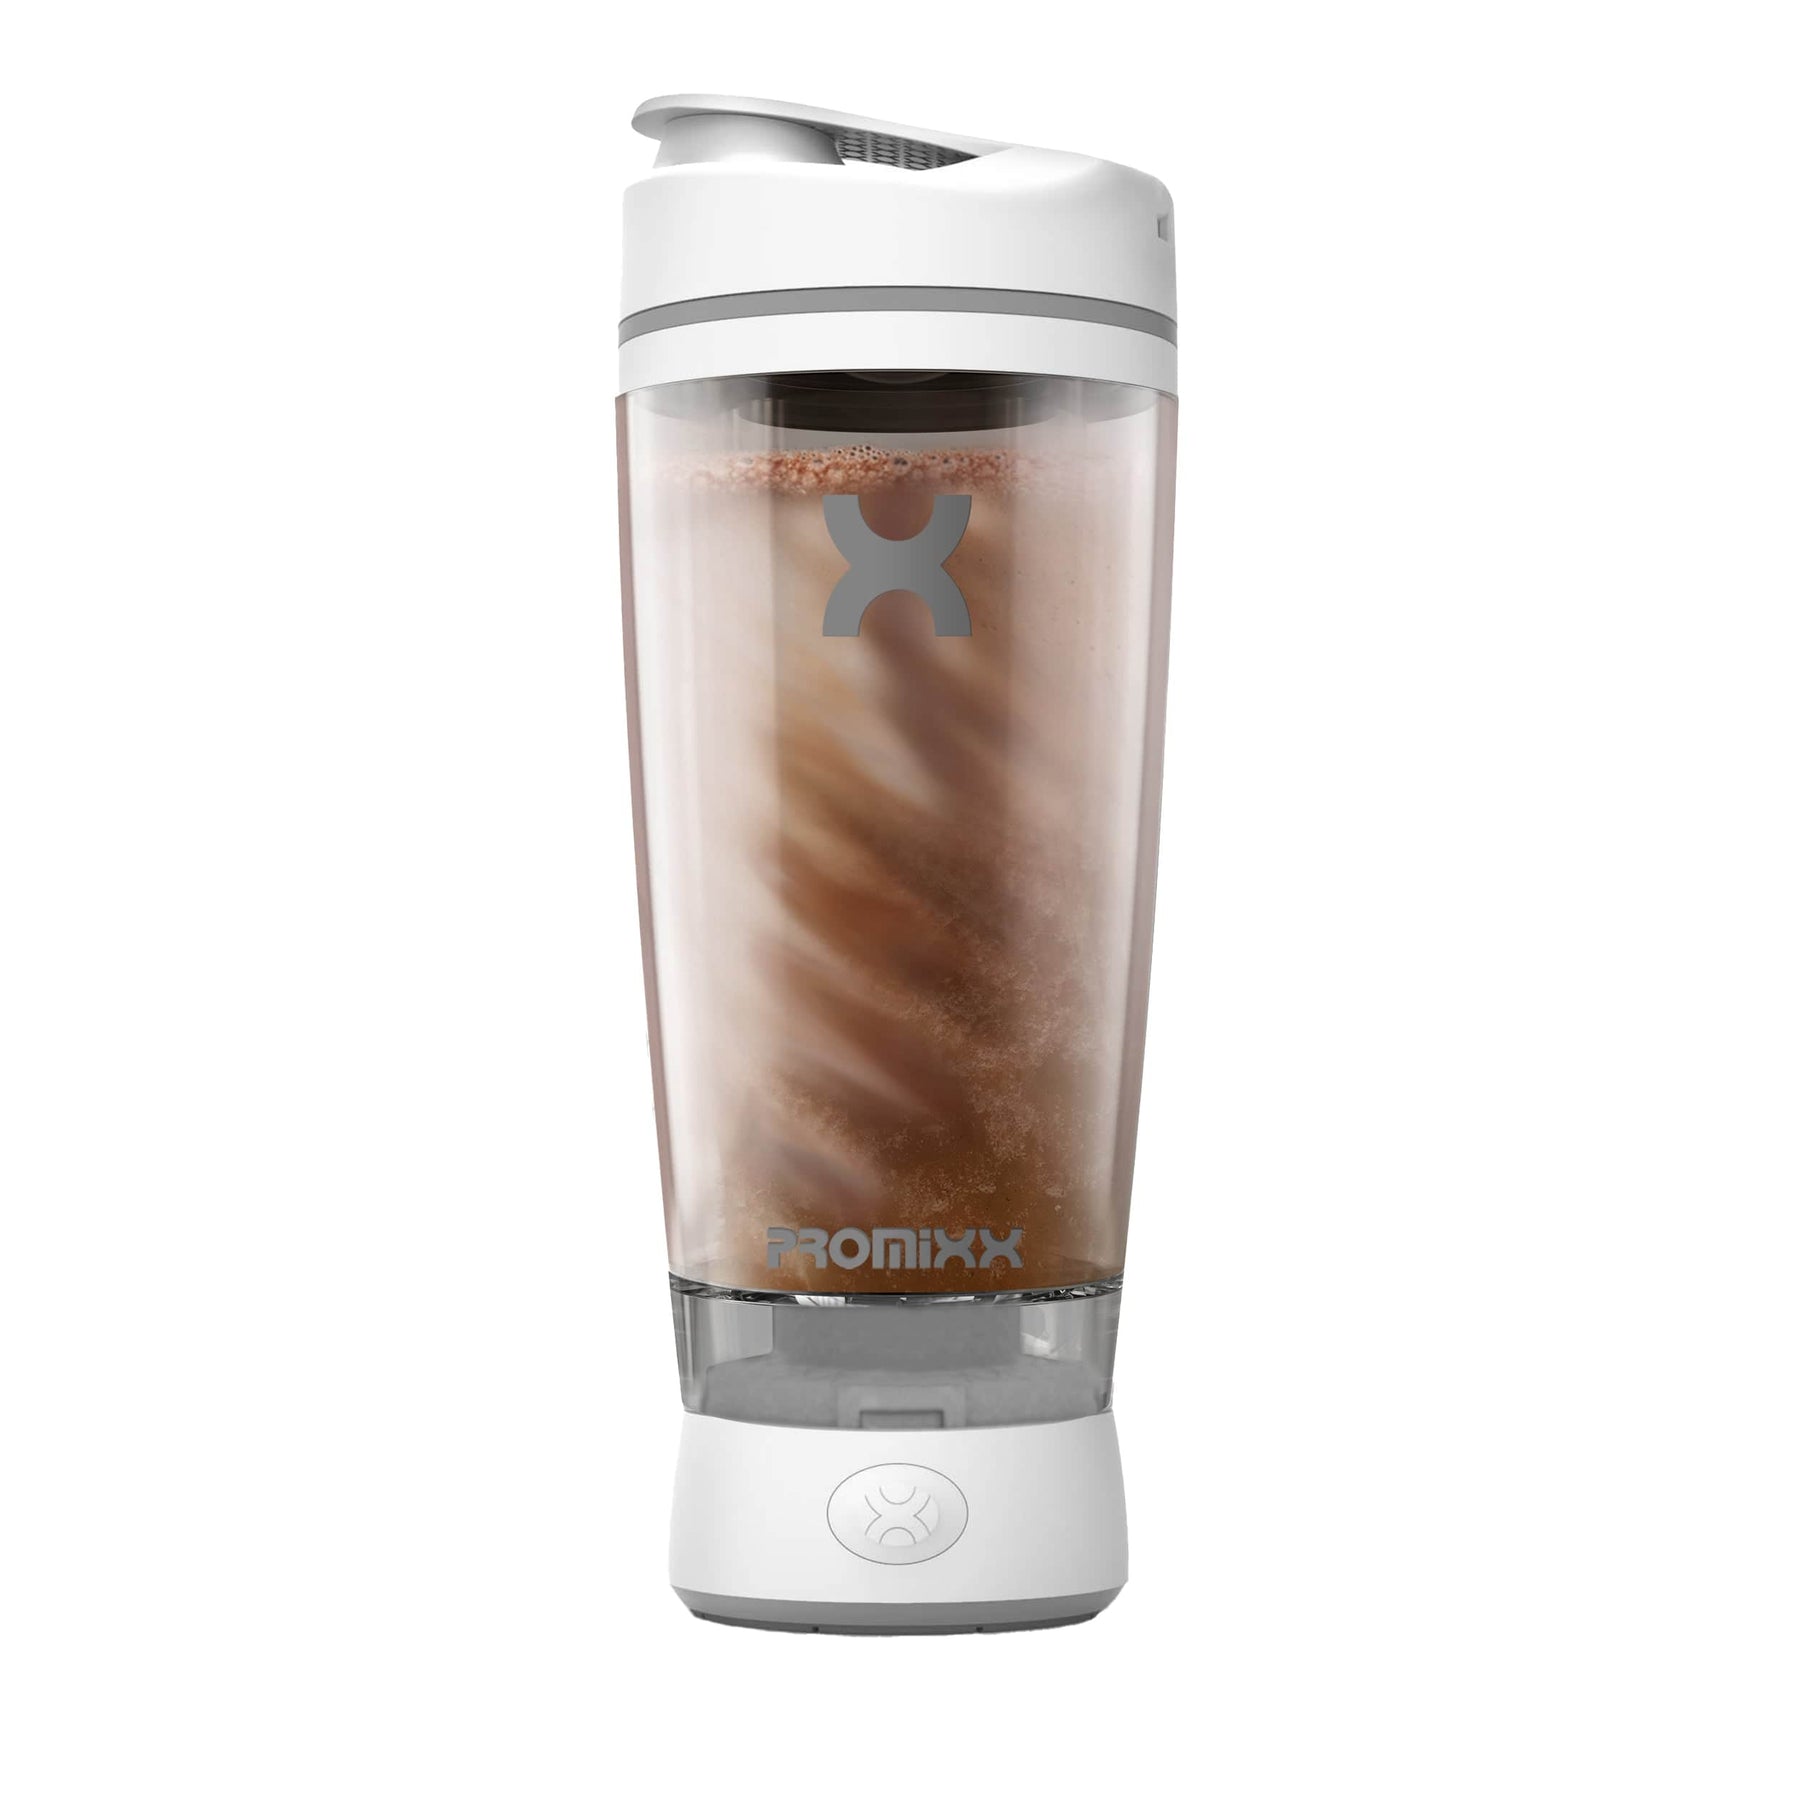 The brand new PROMiXX™ Shaker Bottle has arrived – say hello to the  smoothest shakes you've ever tasted! ⠀⠀⠀⠀⠀⠀⠀⠀⠀ ⠀⠀⠀⠀⠀⠀⠀⠀⠀ Our favourite  thing about, By Isagenix Europe